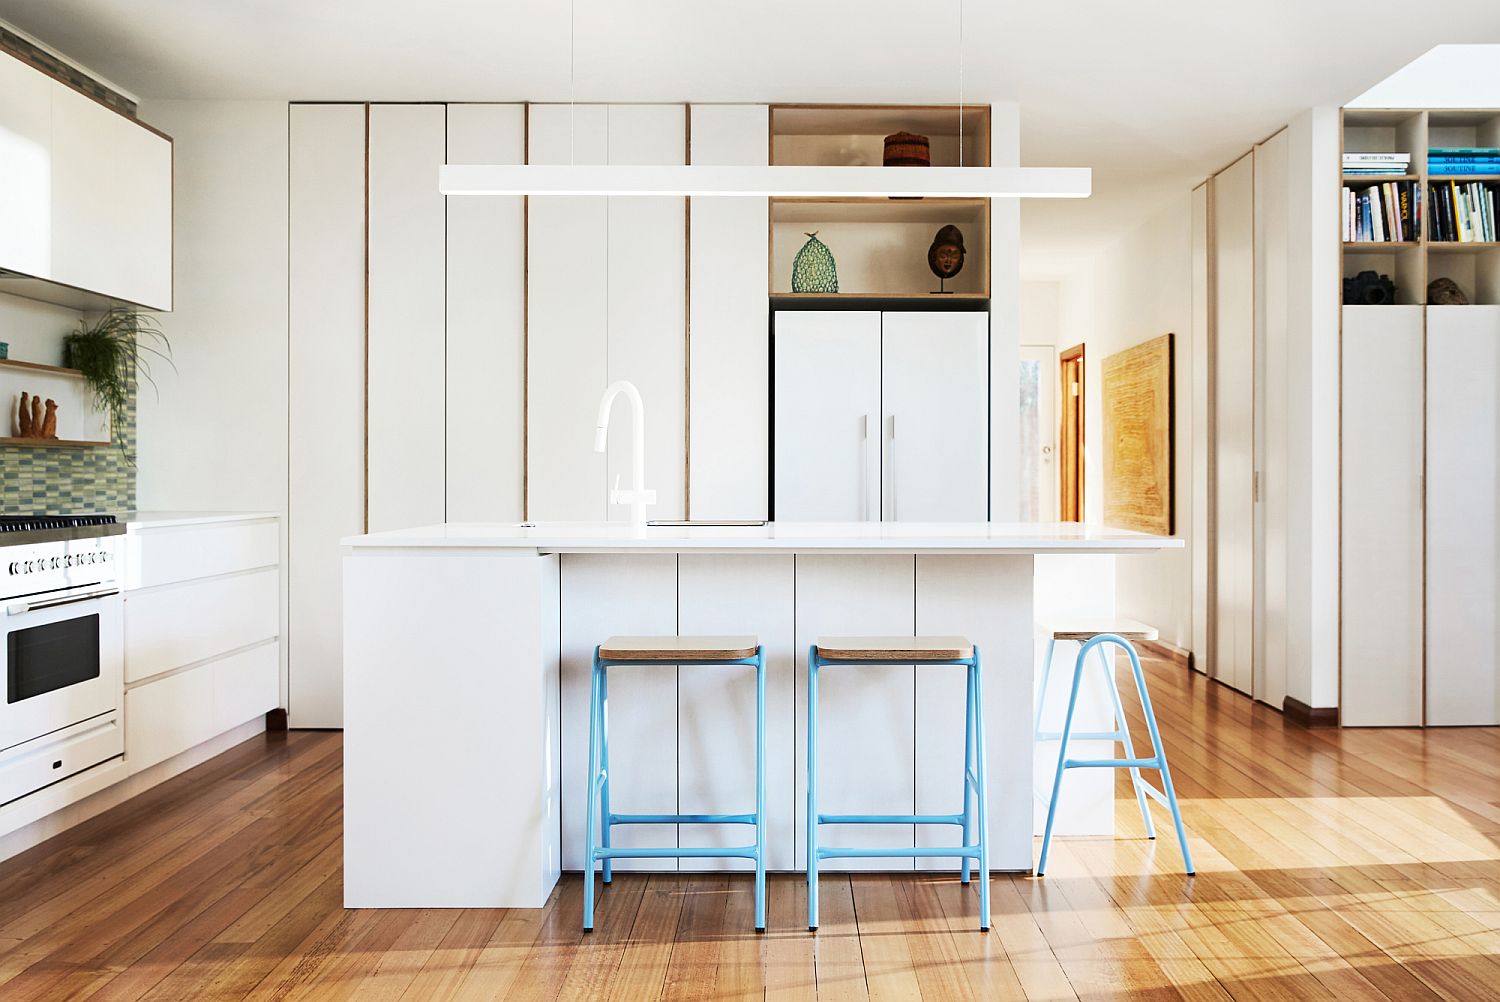 It-is-the-flooring-that-brings-wood-to-this-contemporary-kitchen-in-white